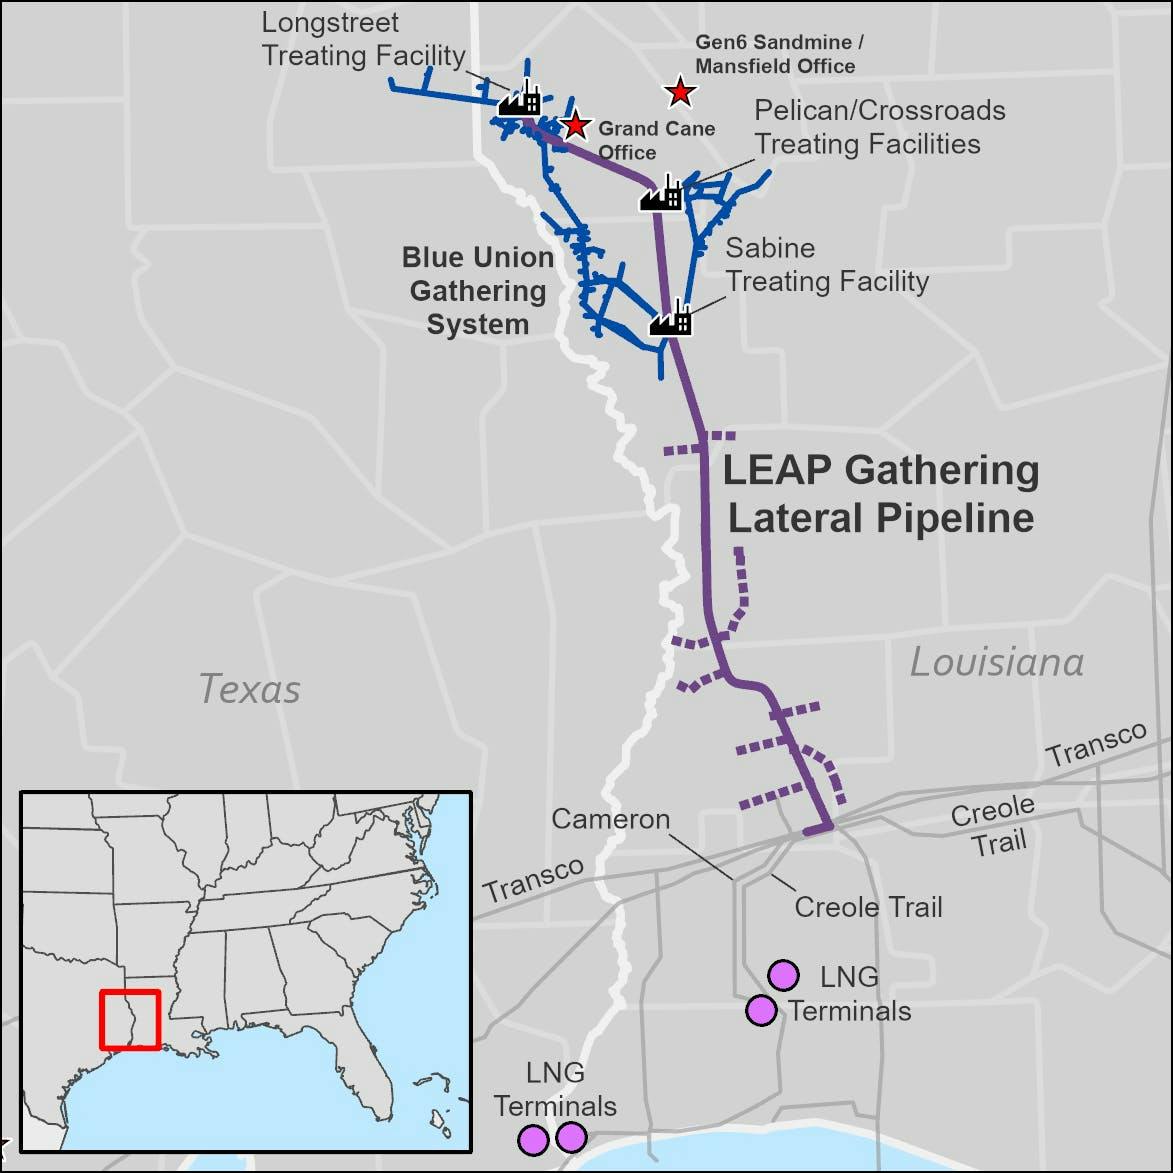 LEAP Gathering Lateral Pipeline.